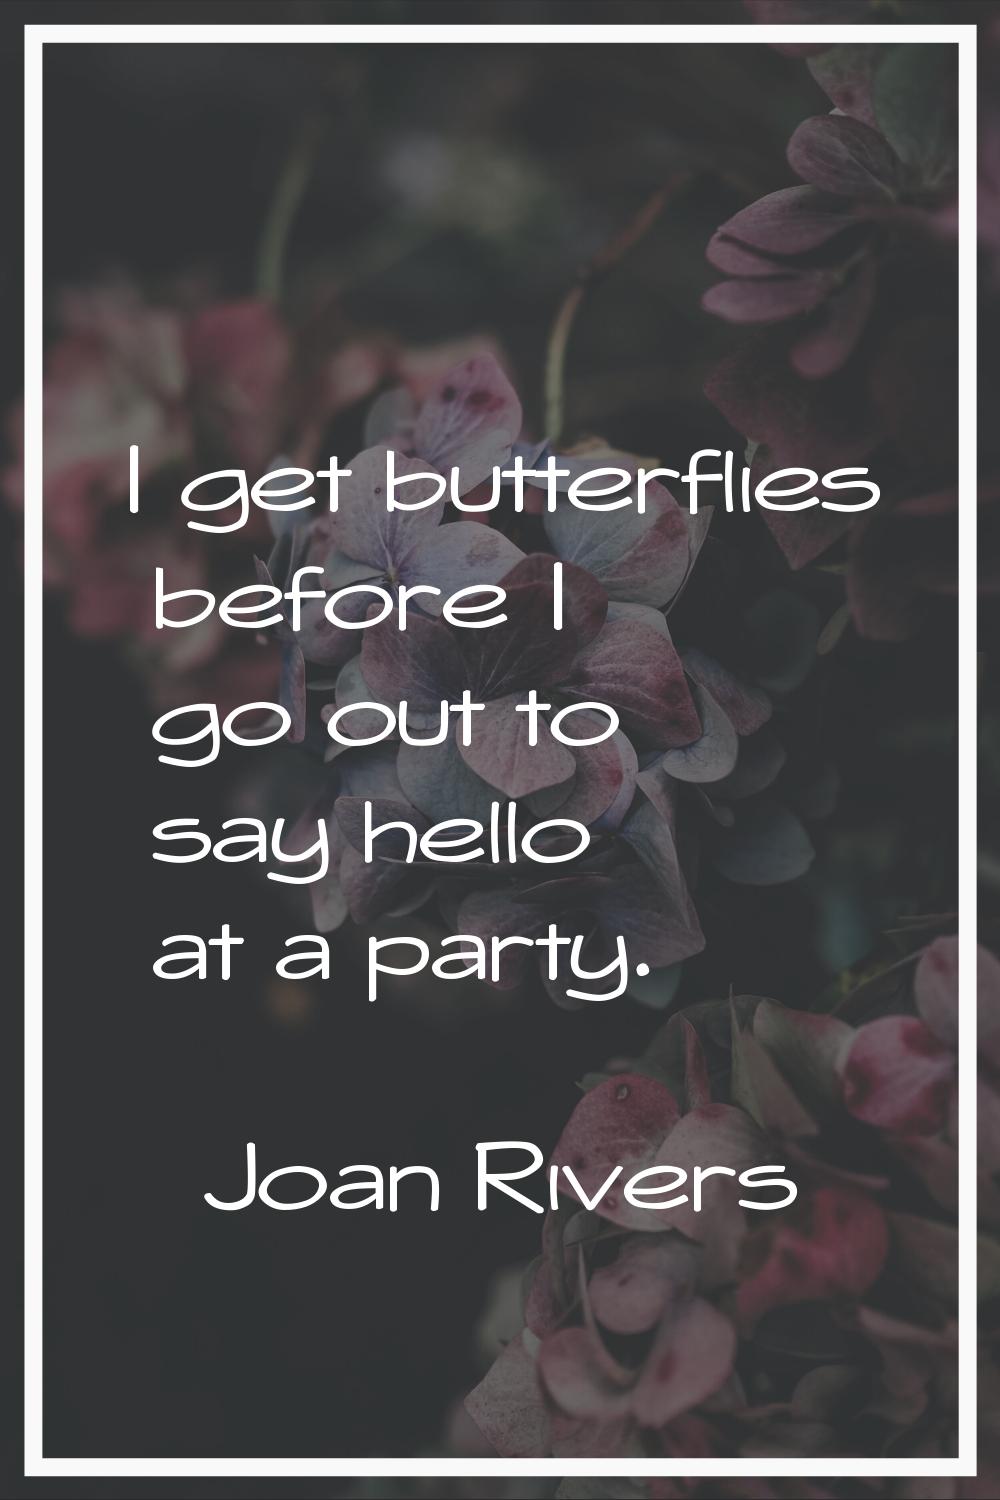 I get butterflies before I go out to say hello at a party.